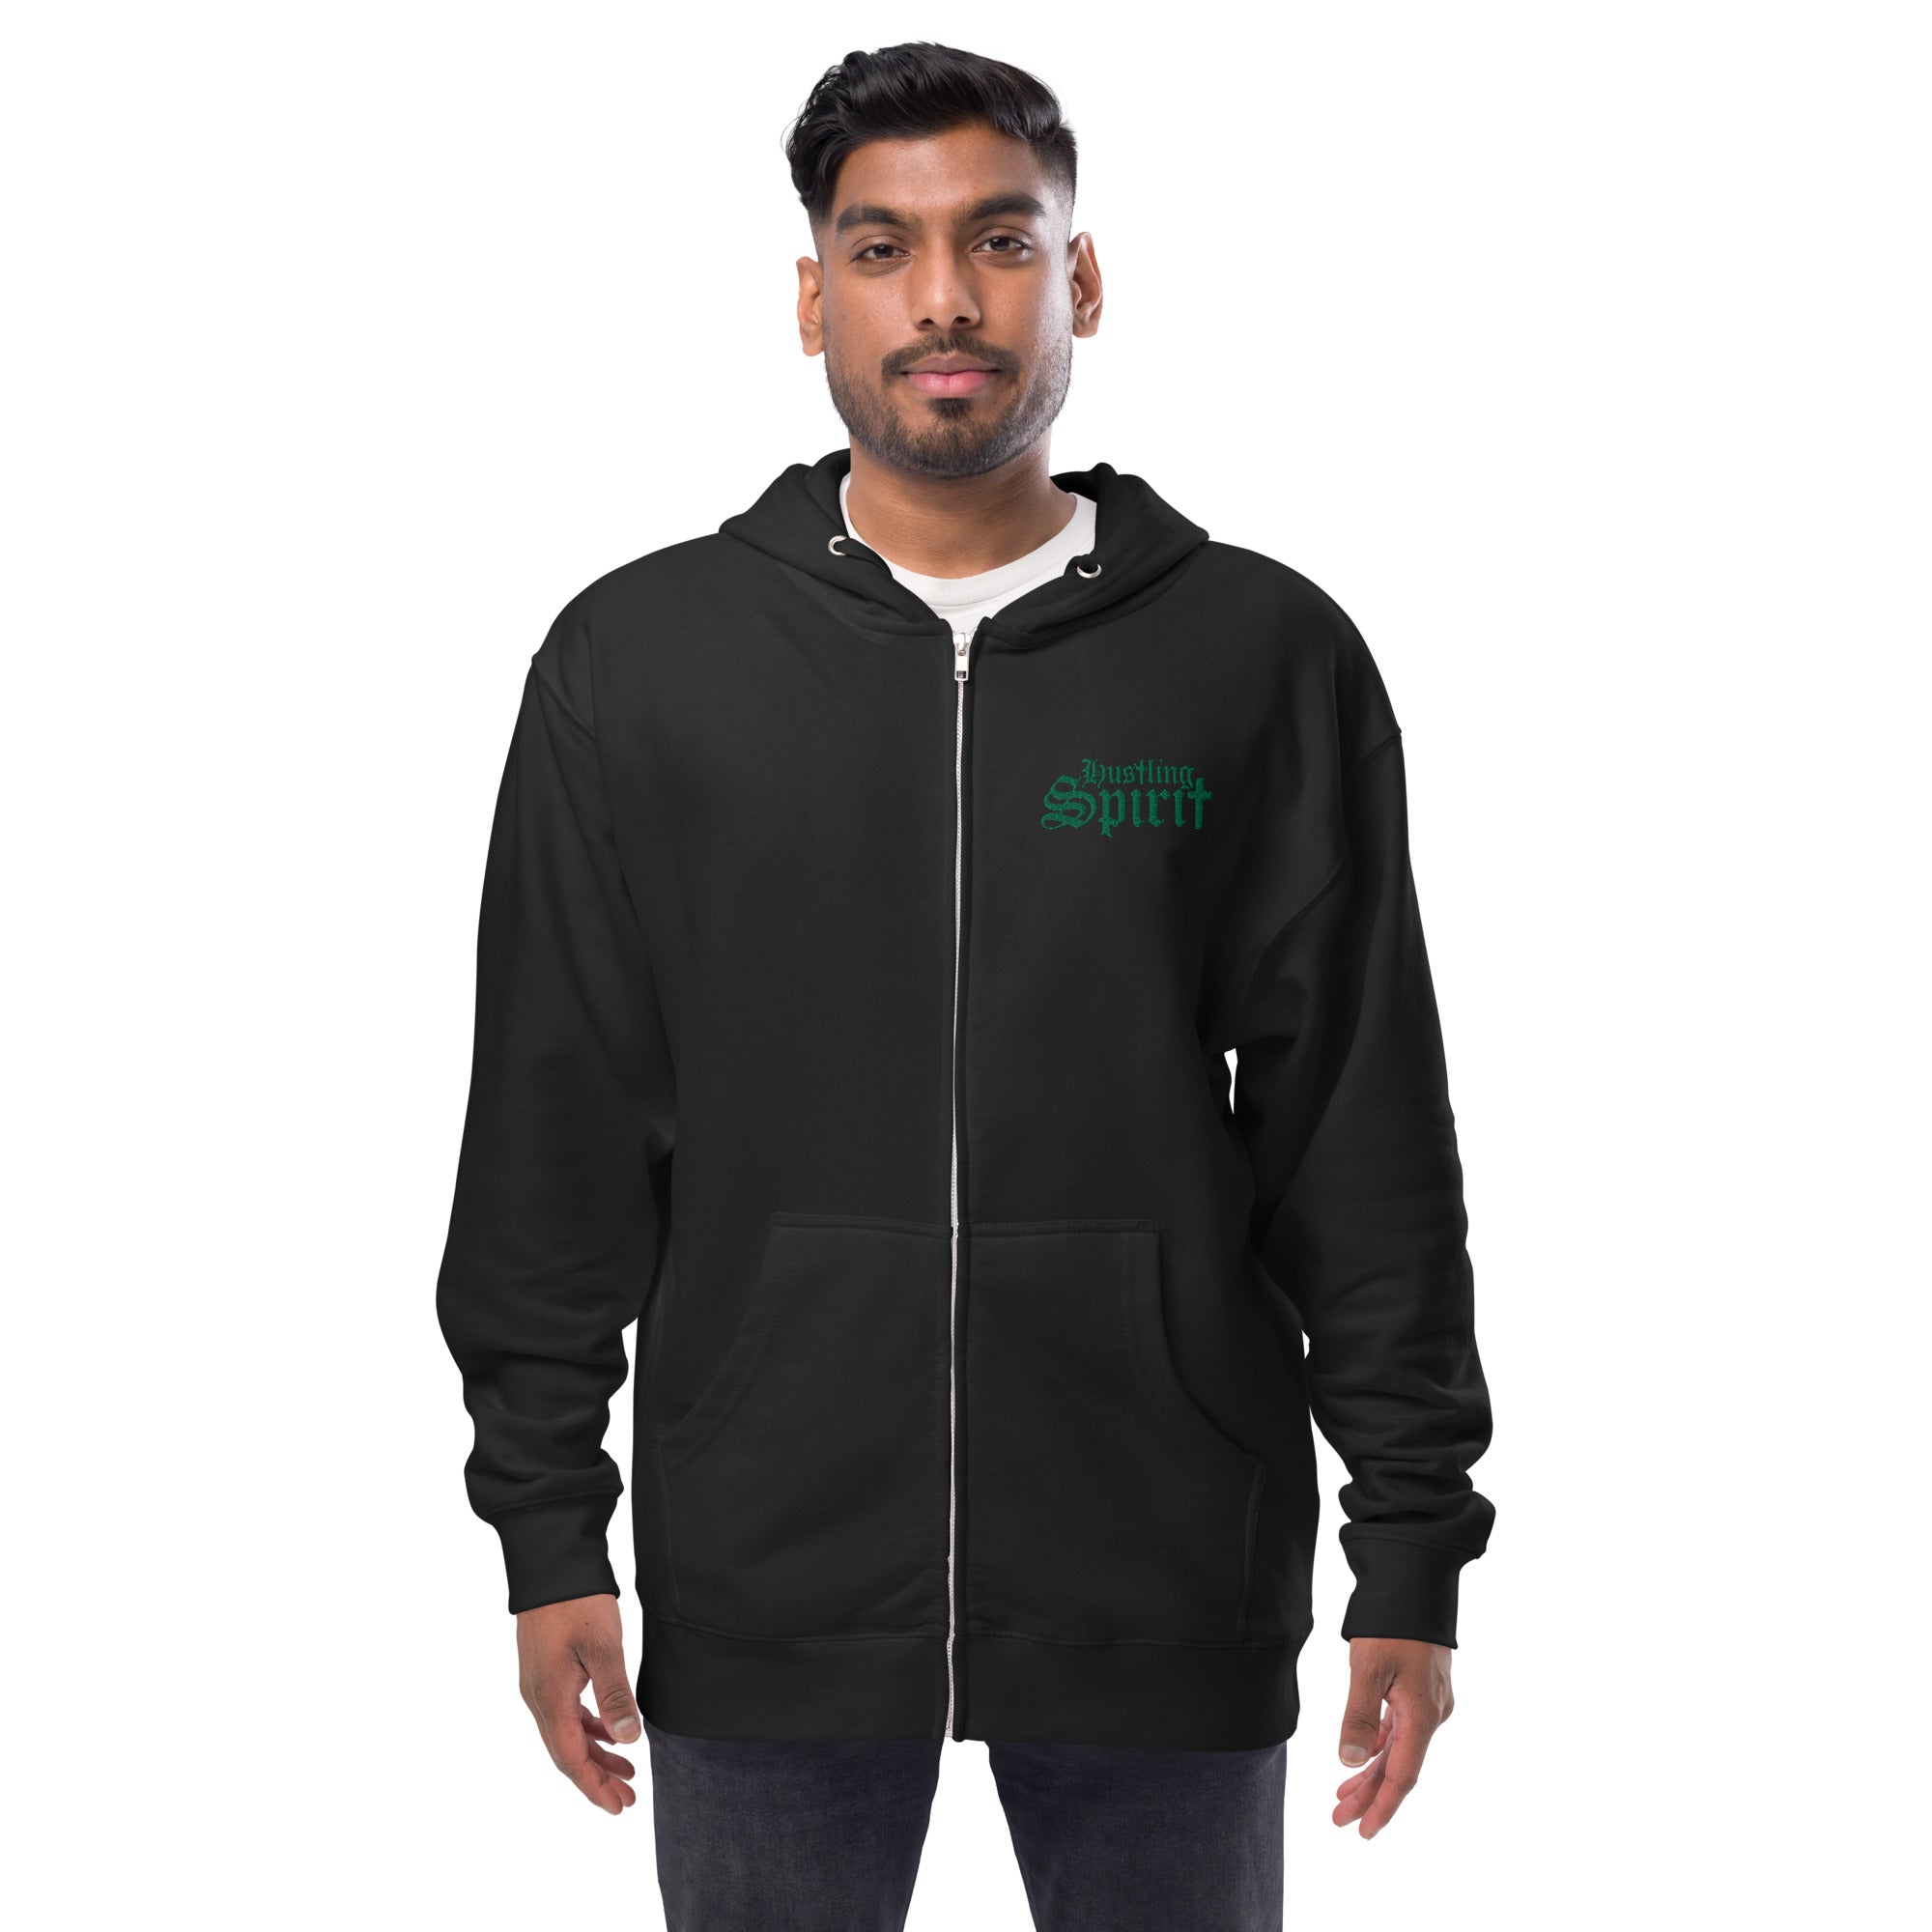 HS Logo Kelly Green zip up embroidered hoodie